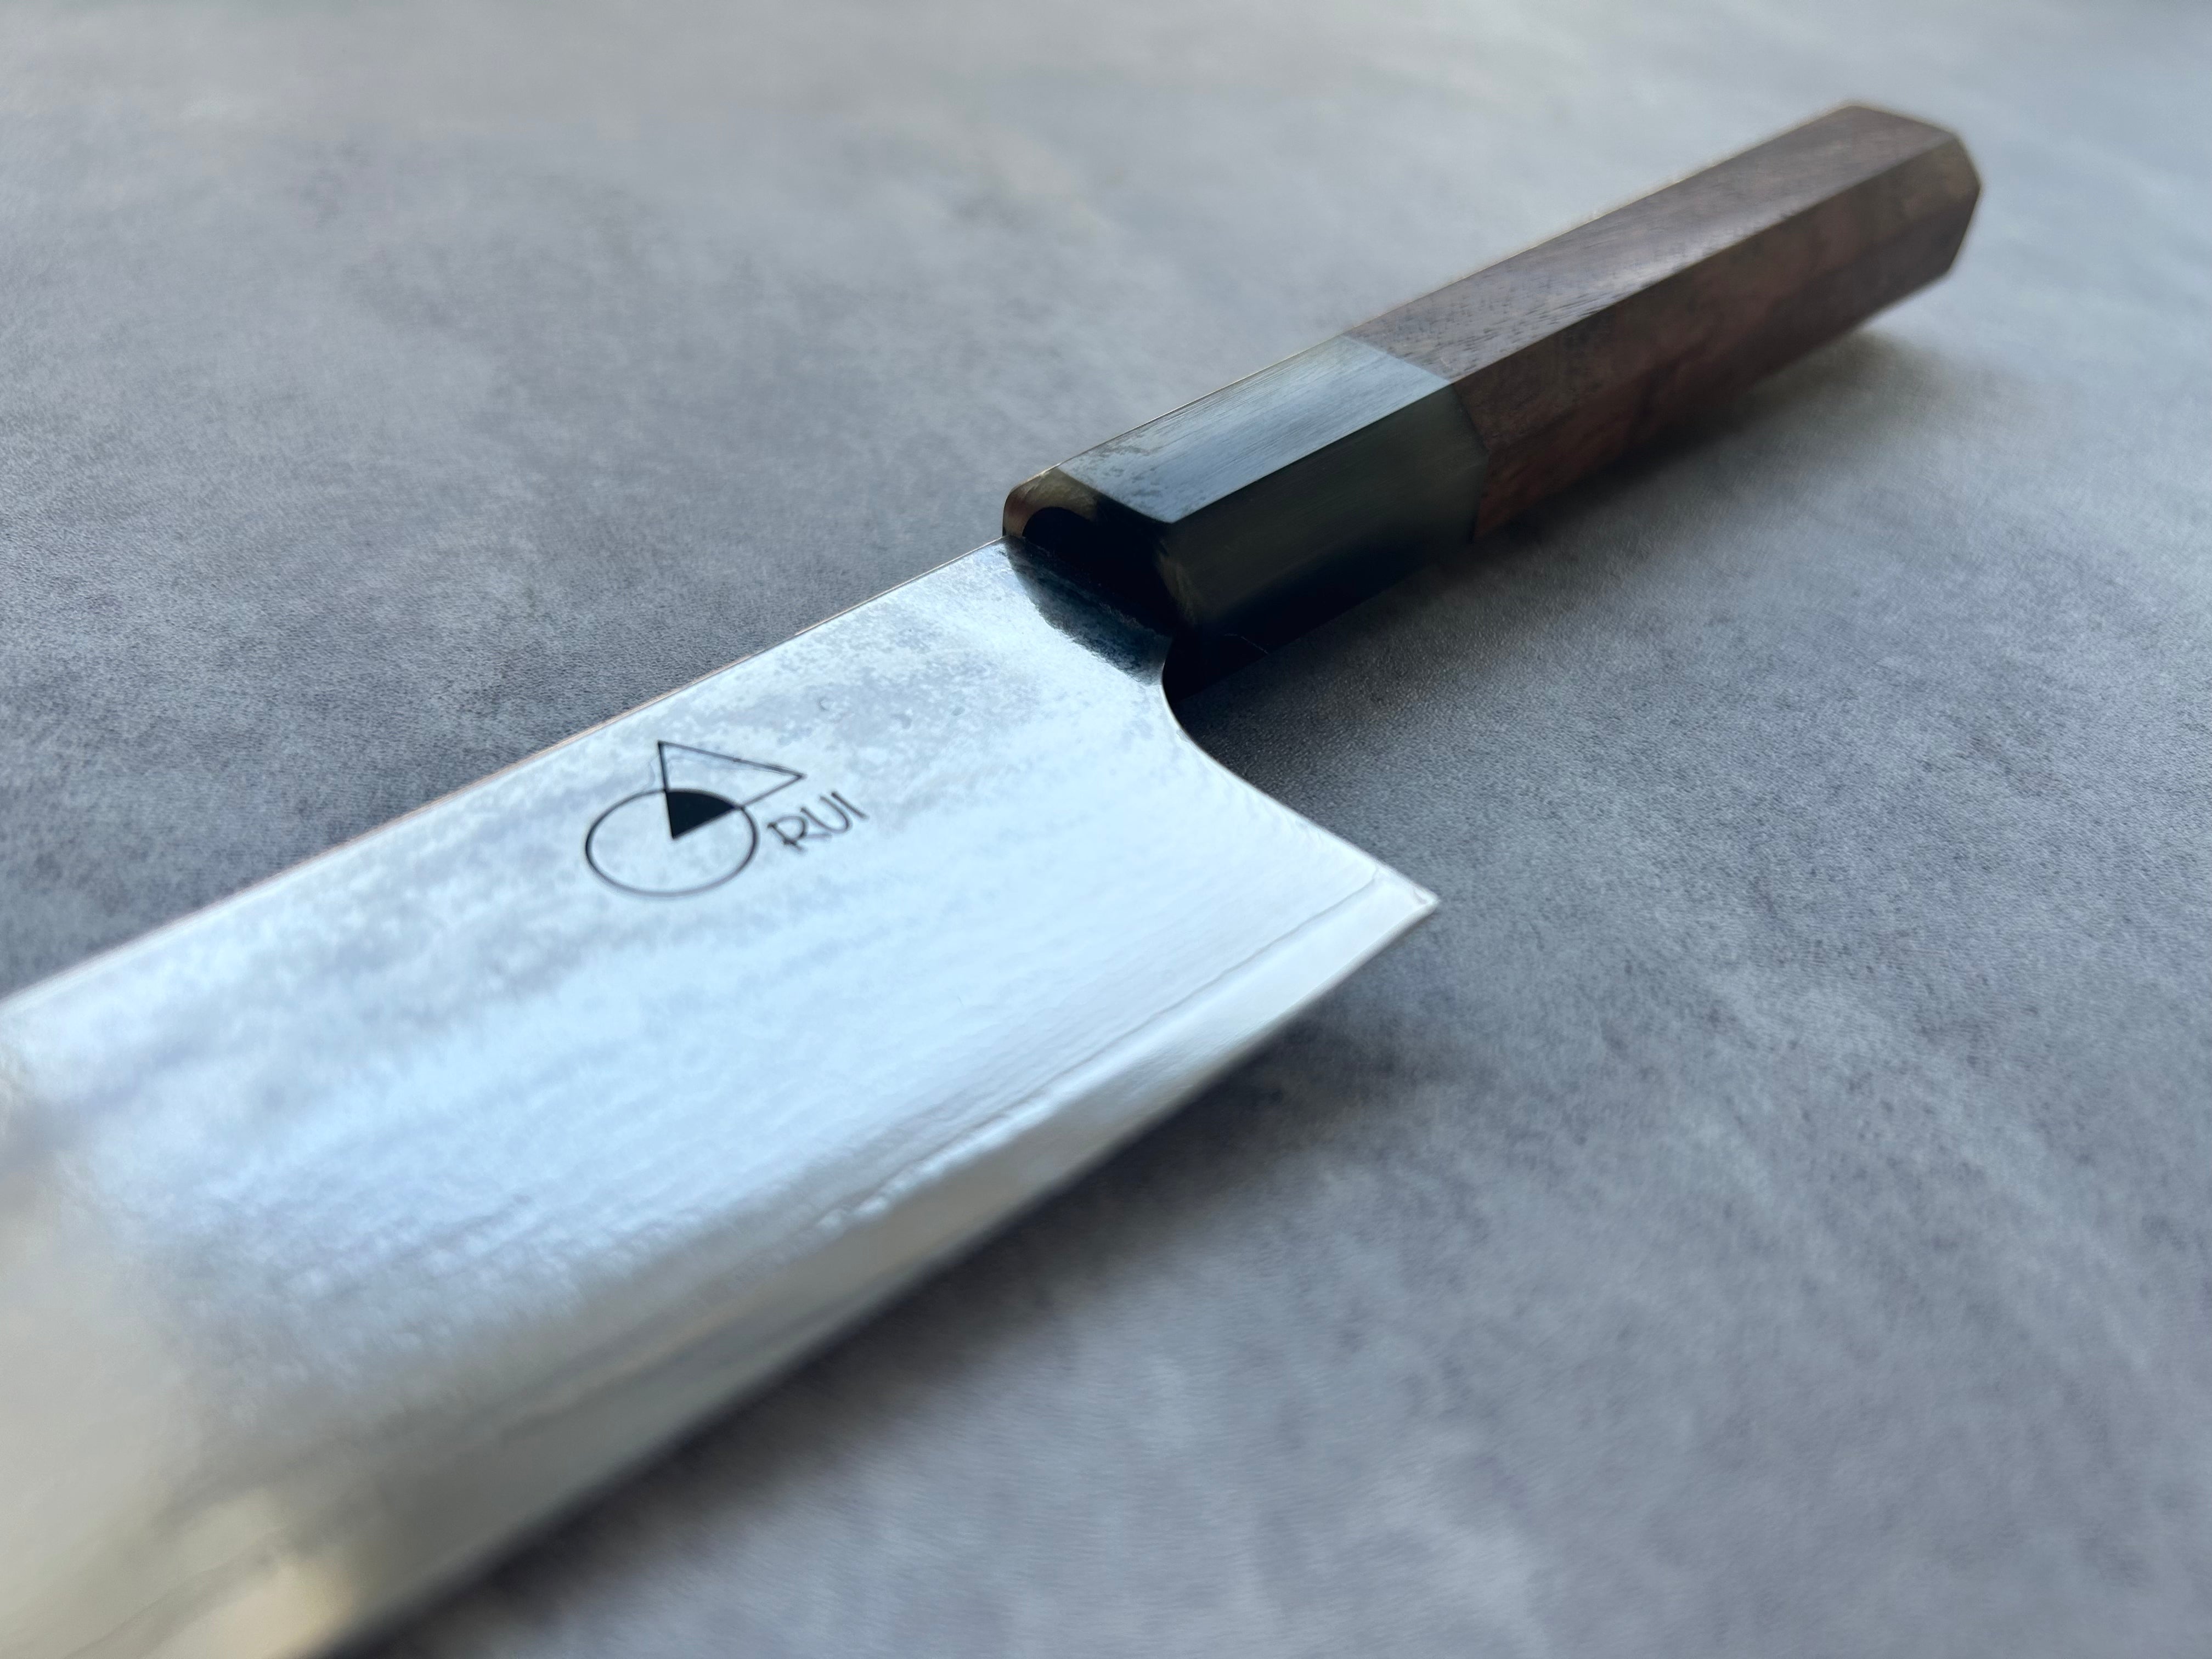 "ZEN" JAPANESE AUS-10 Damasucs 8inch Santoku- Best home-use high end RUI knife currently FREE SHIPPING